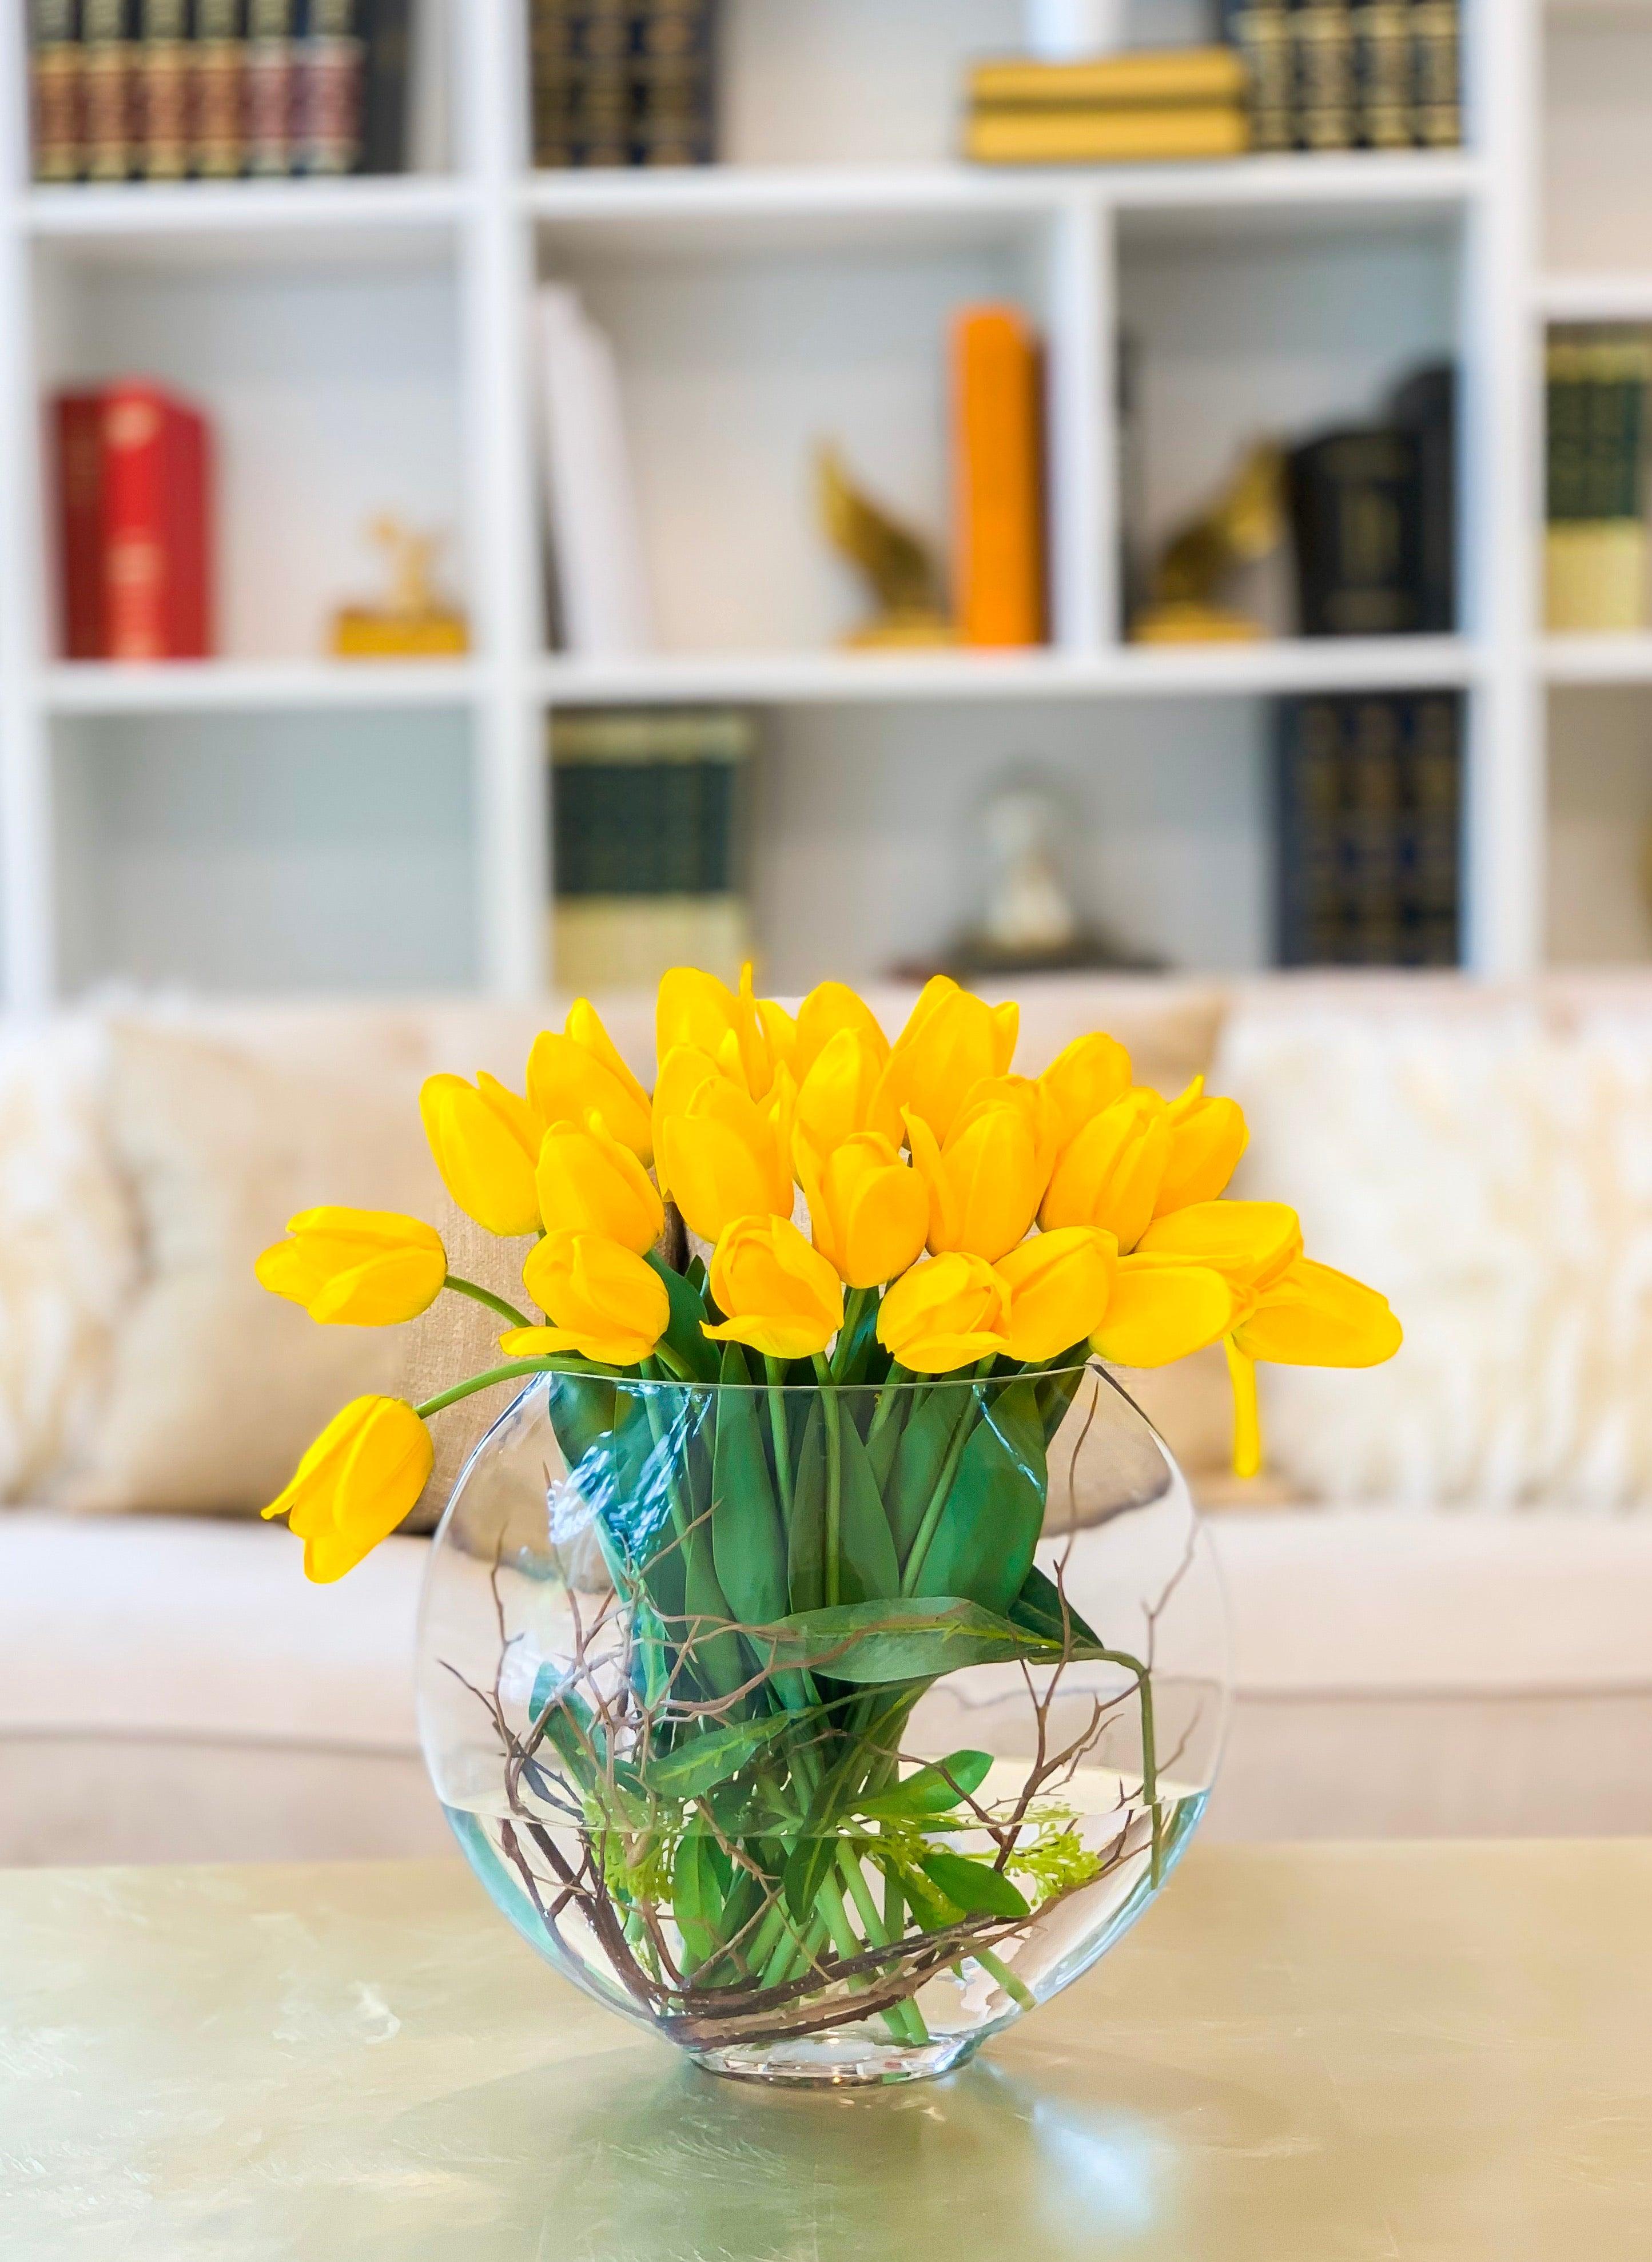 Large Yellow Real Touch Tulip Arrangement-Tulip Real Touch Flower Arrangement-Tulip Centerpiece-Faux Tulip Centerpiece- Yellow Flower Center - Flovery